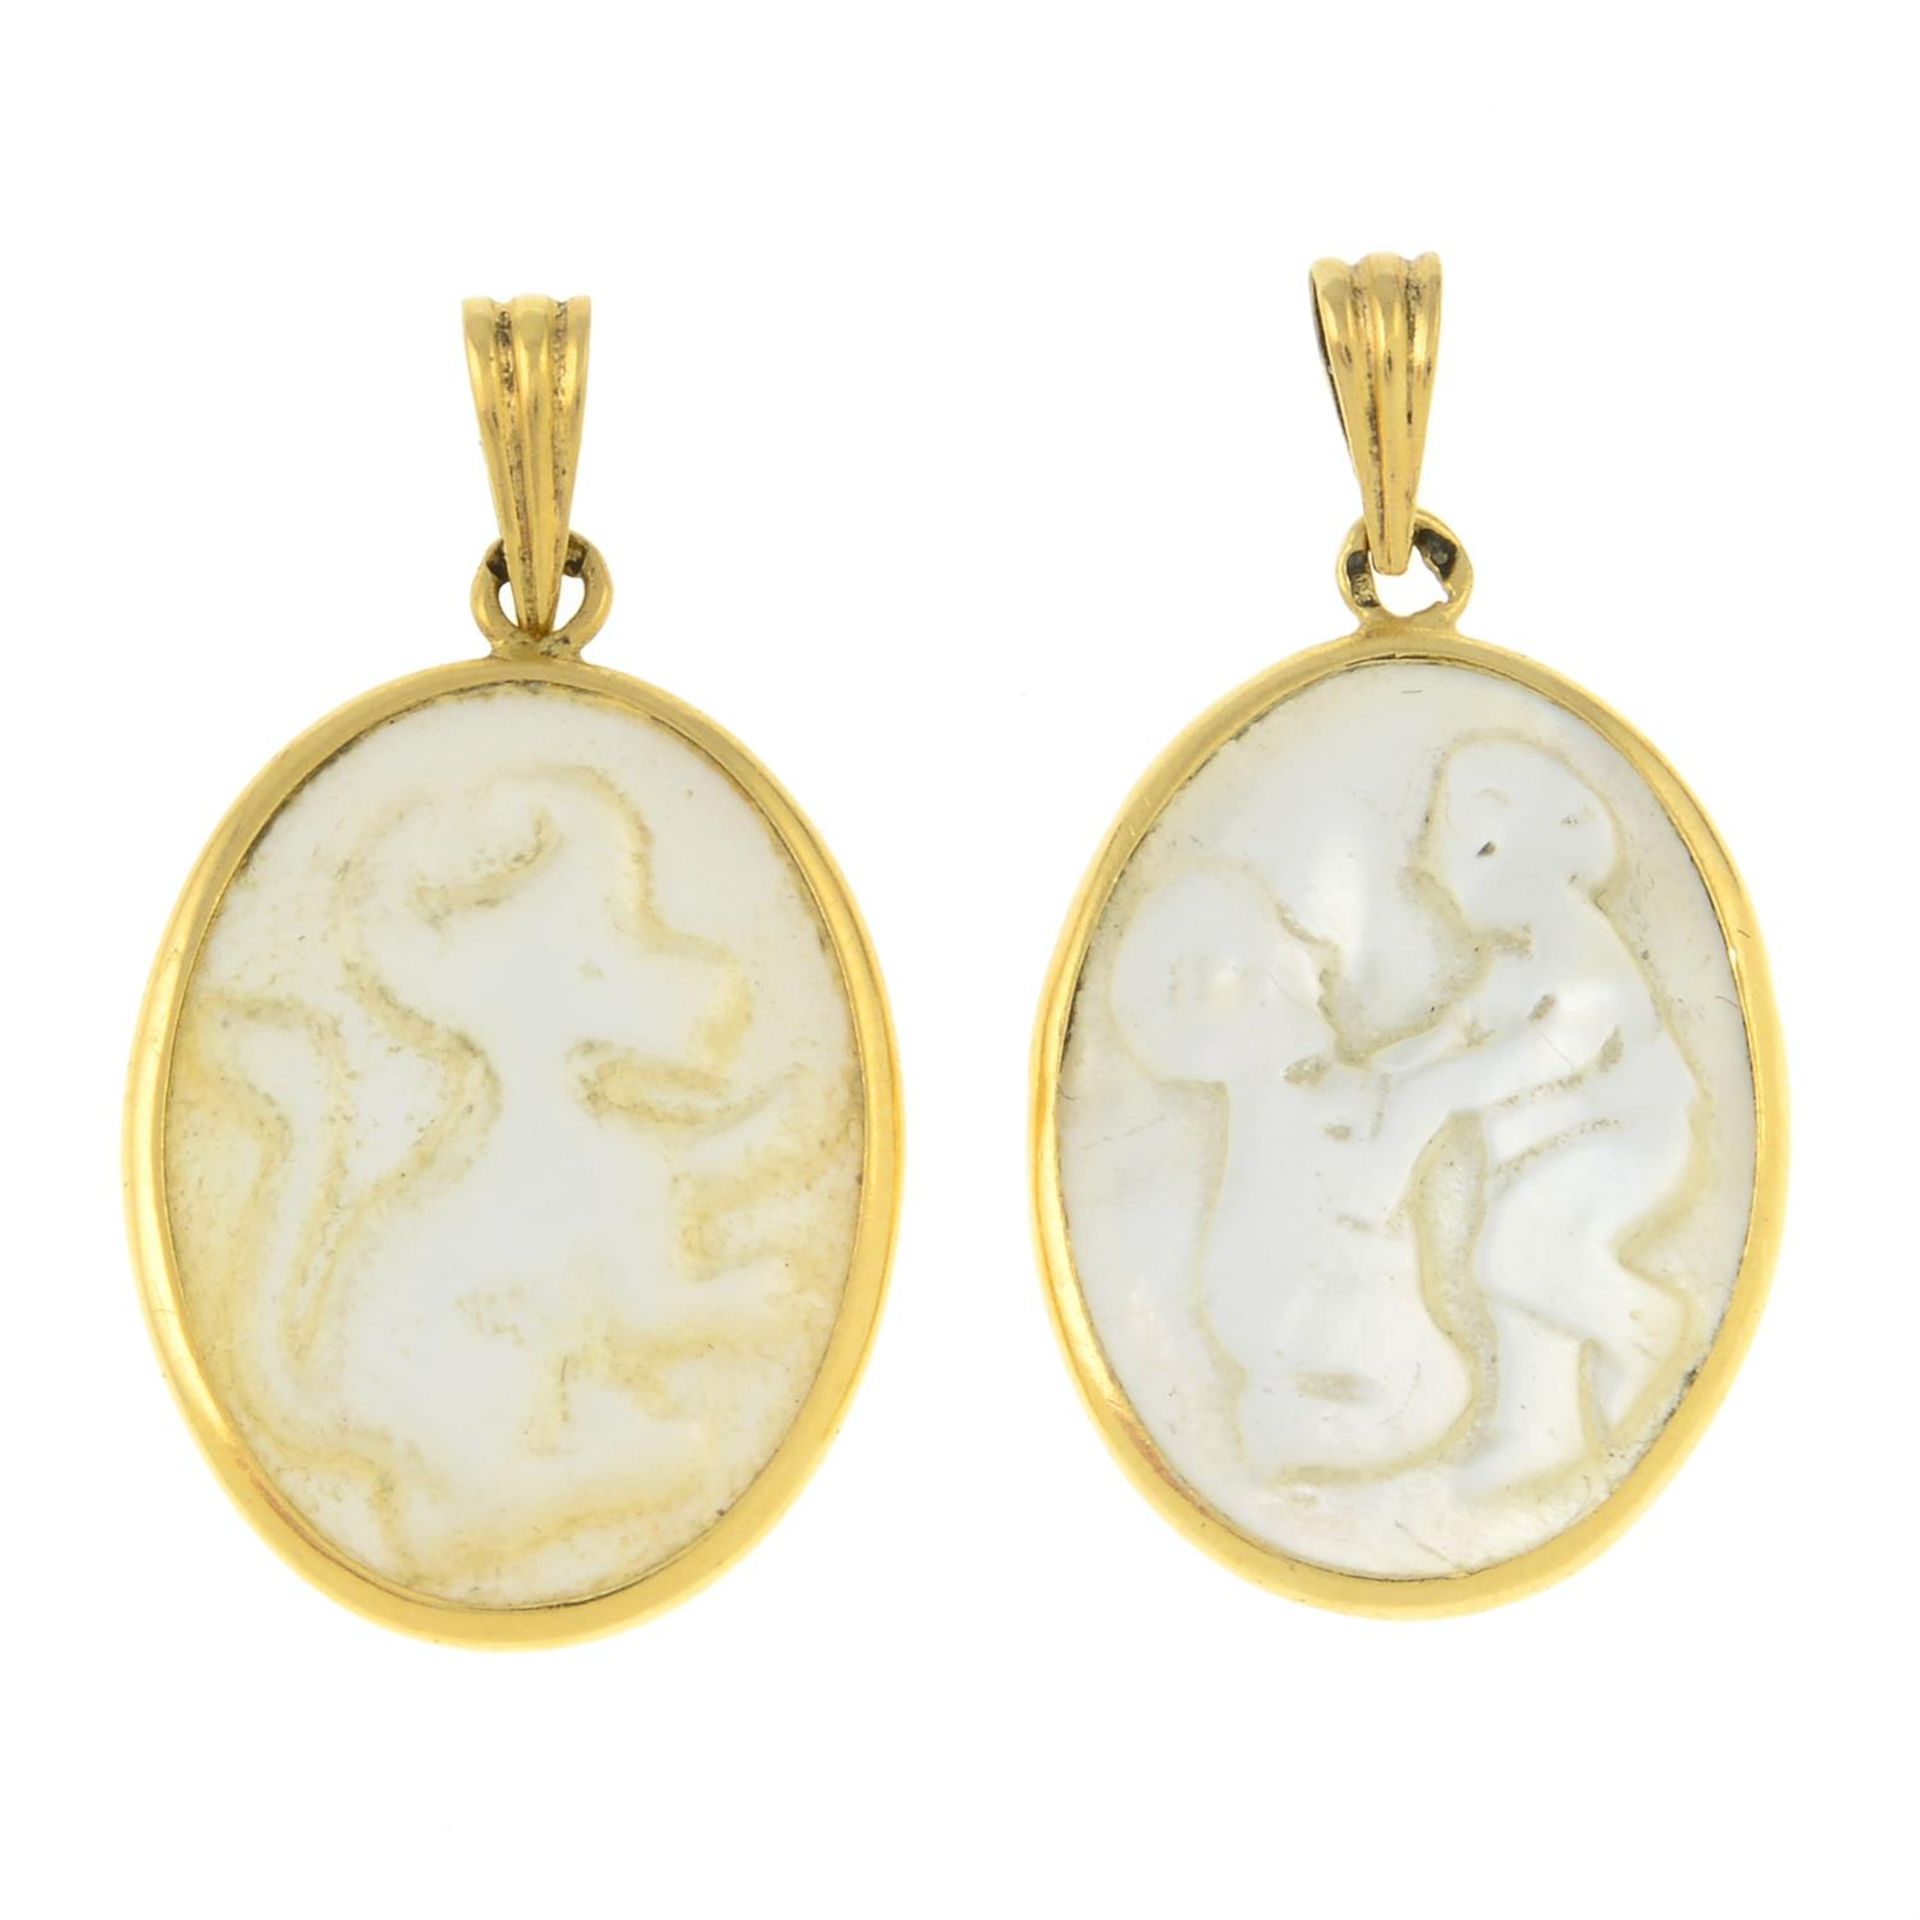 Two mother-of-pearl cameo pendants, depicting Taurus and Gemini.